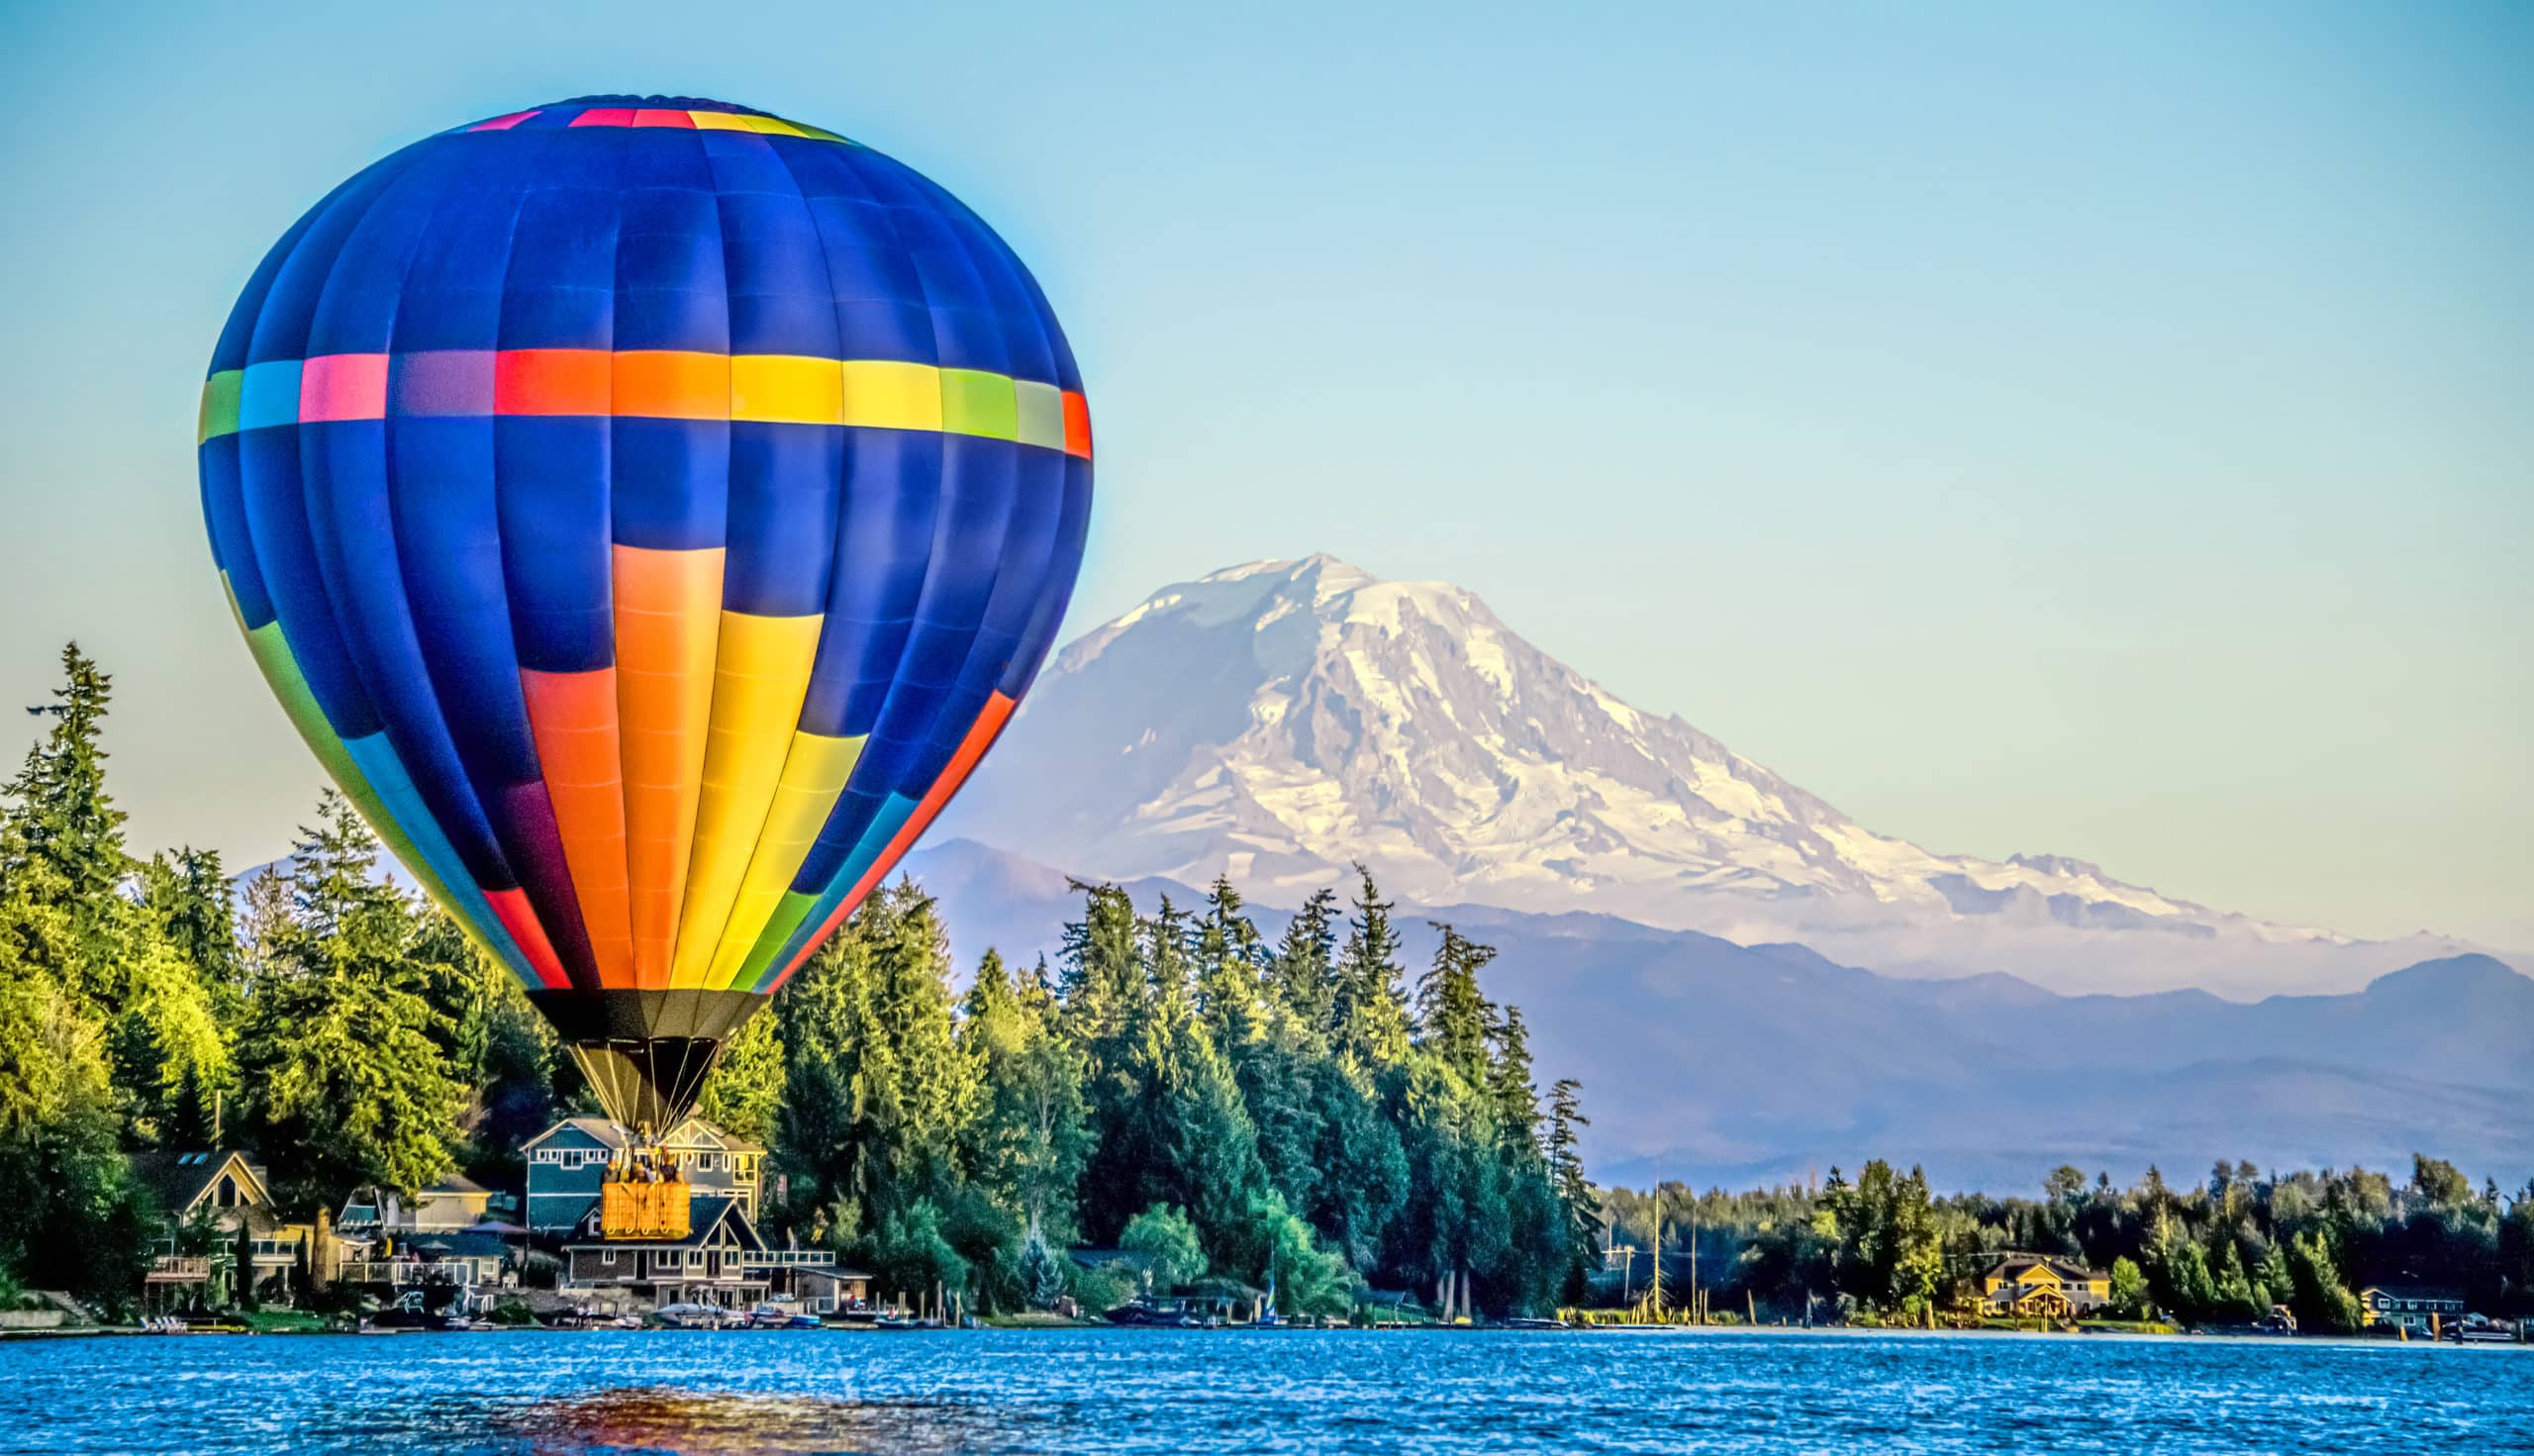 Take Your Adventure to New Heights with Hot Air Balloon Rides Near Mt. Rainier